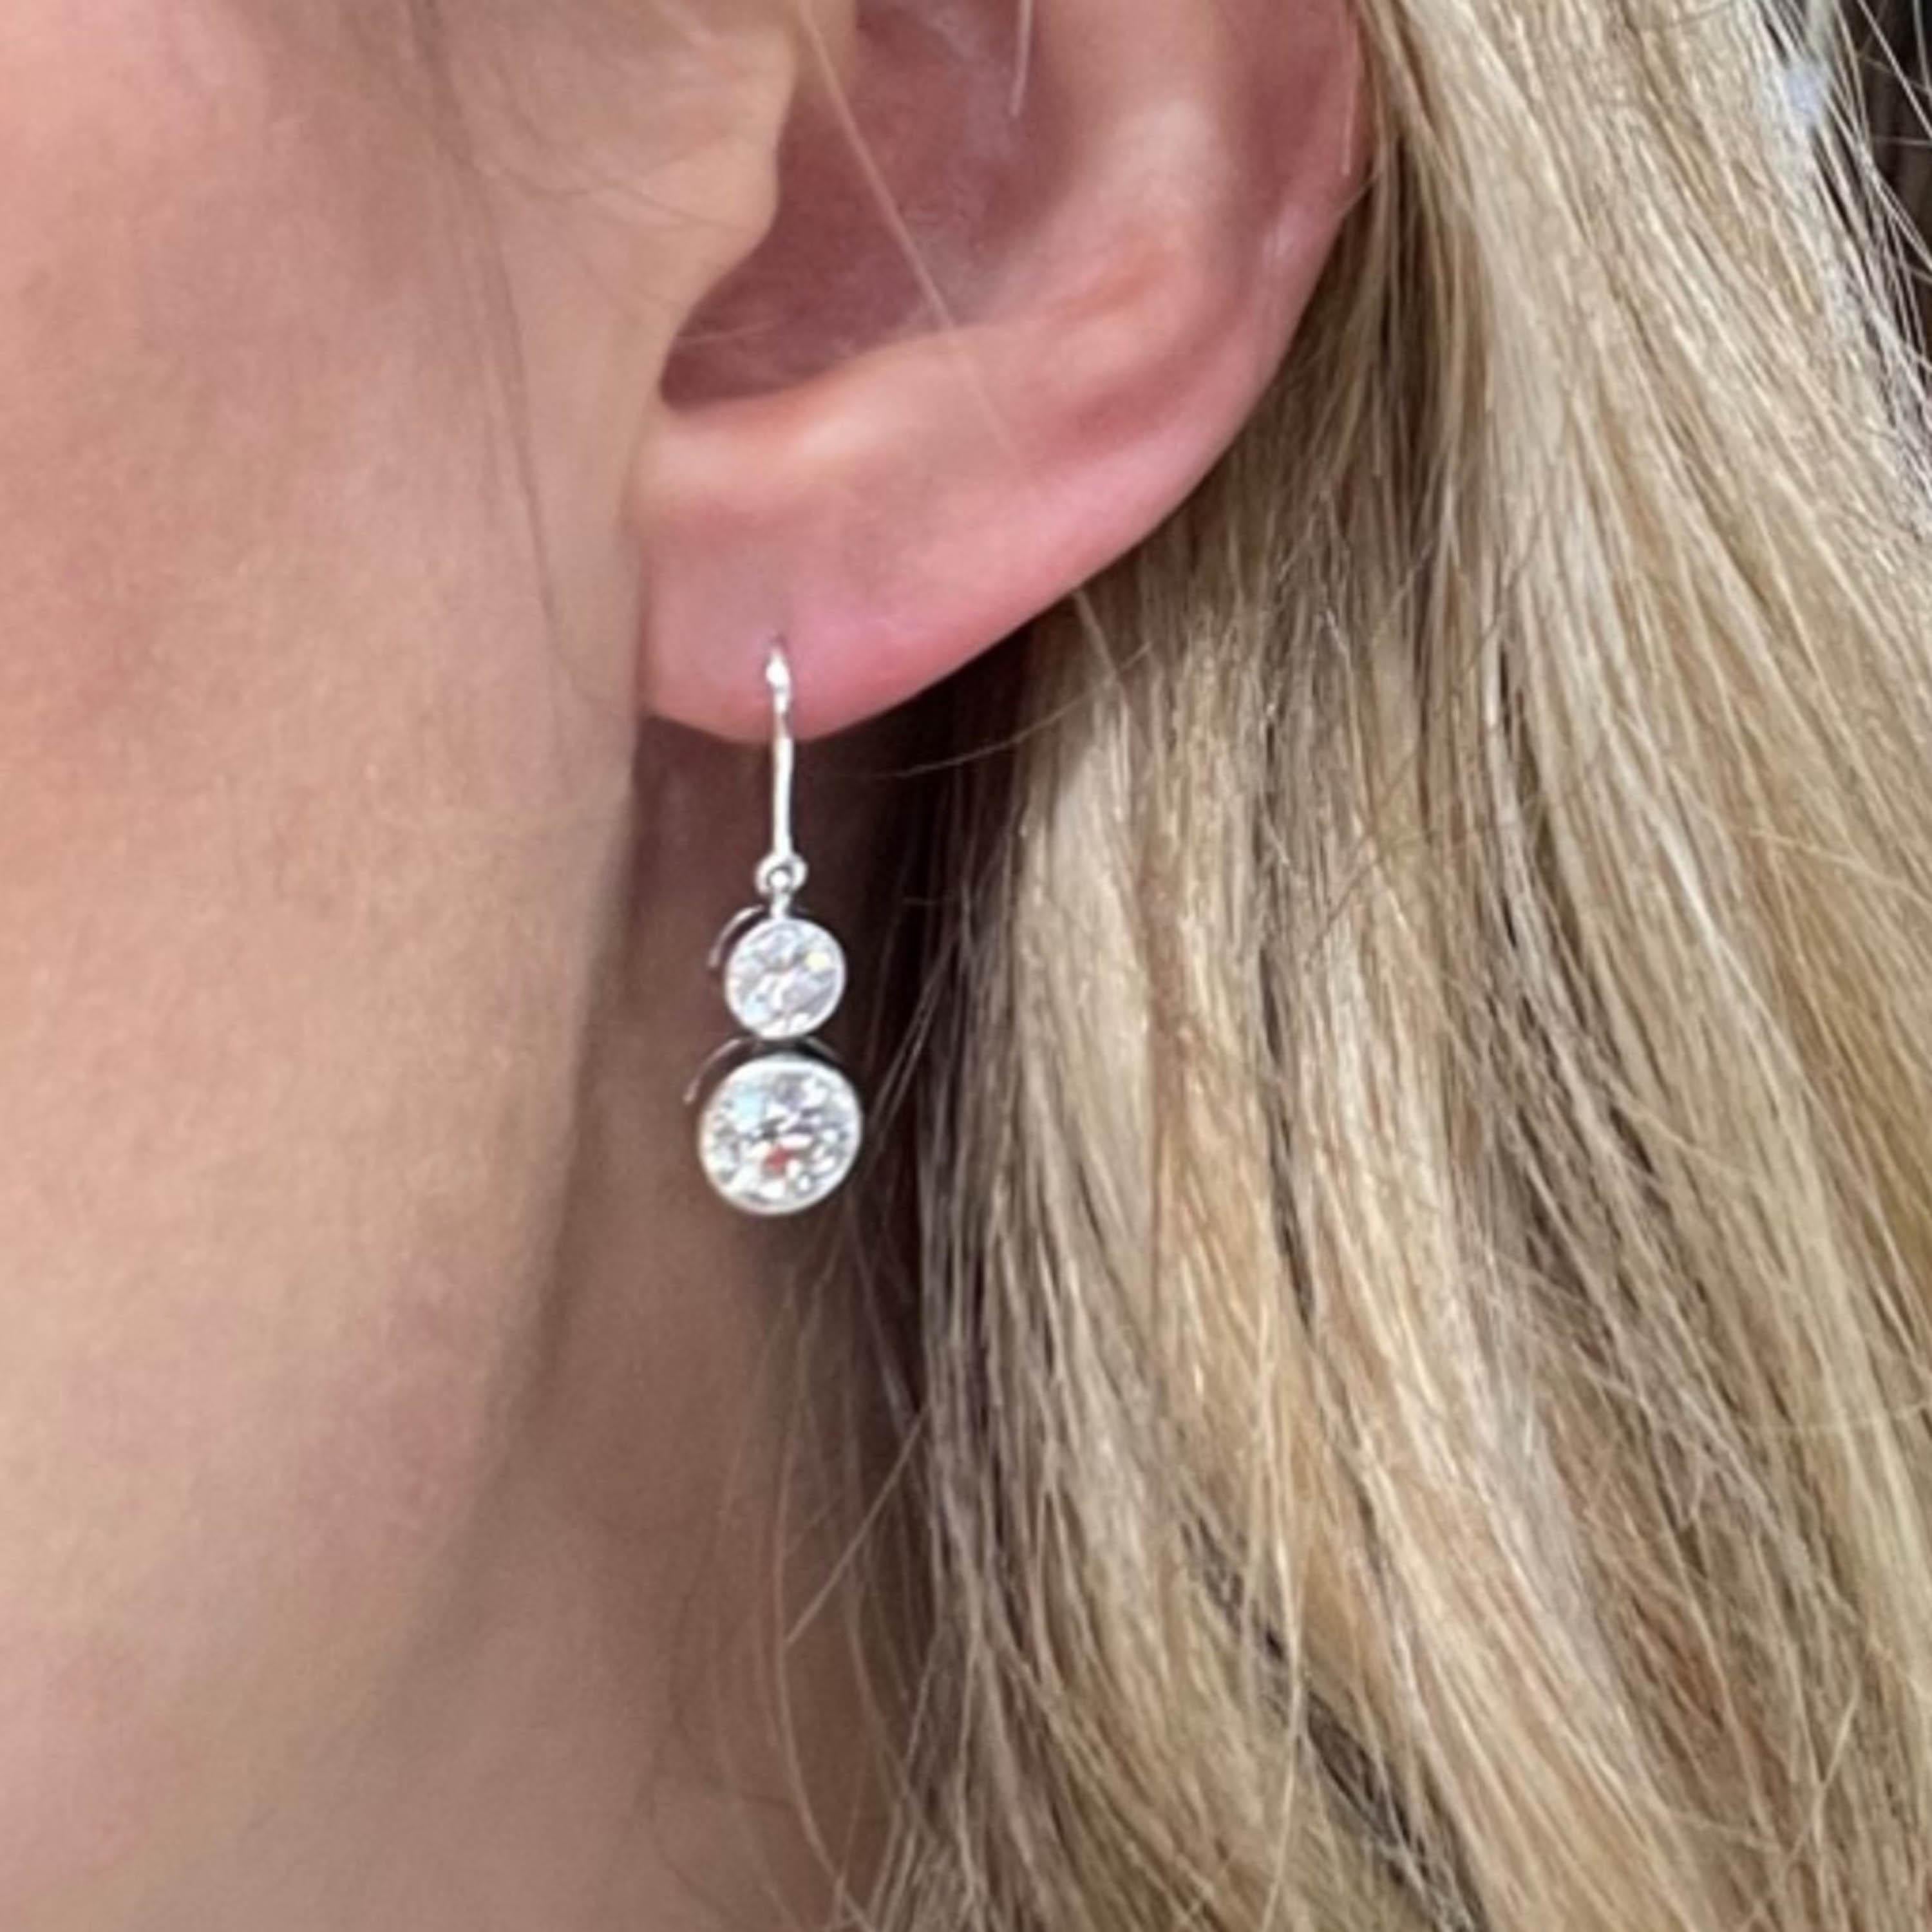 A pair of modern two stone diamond earrings, set with round diamonds weighing a total of 3.47 carats, the two top diamonds weighing a total of 1.16 carats, the two bottom diamonds weighing 1.18 carats and 1.13 carats respectively, grain and rub-over